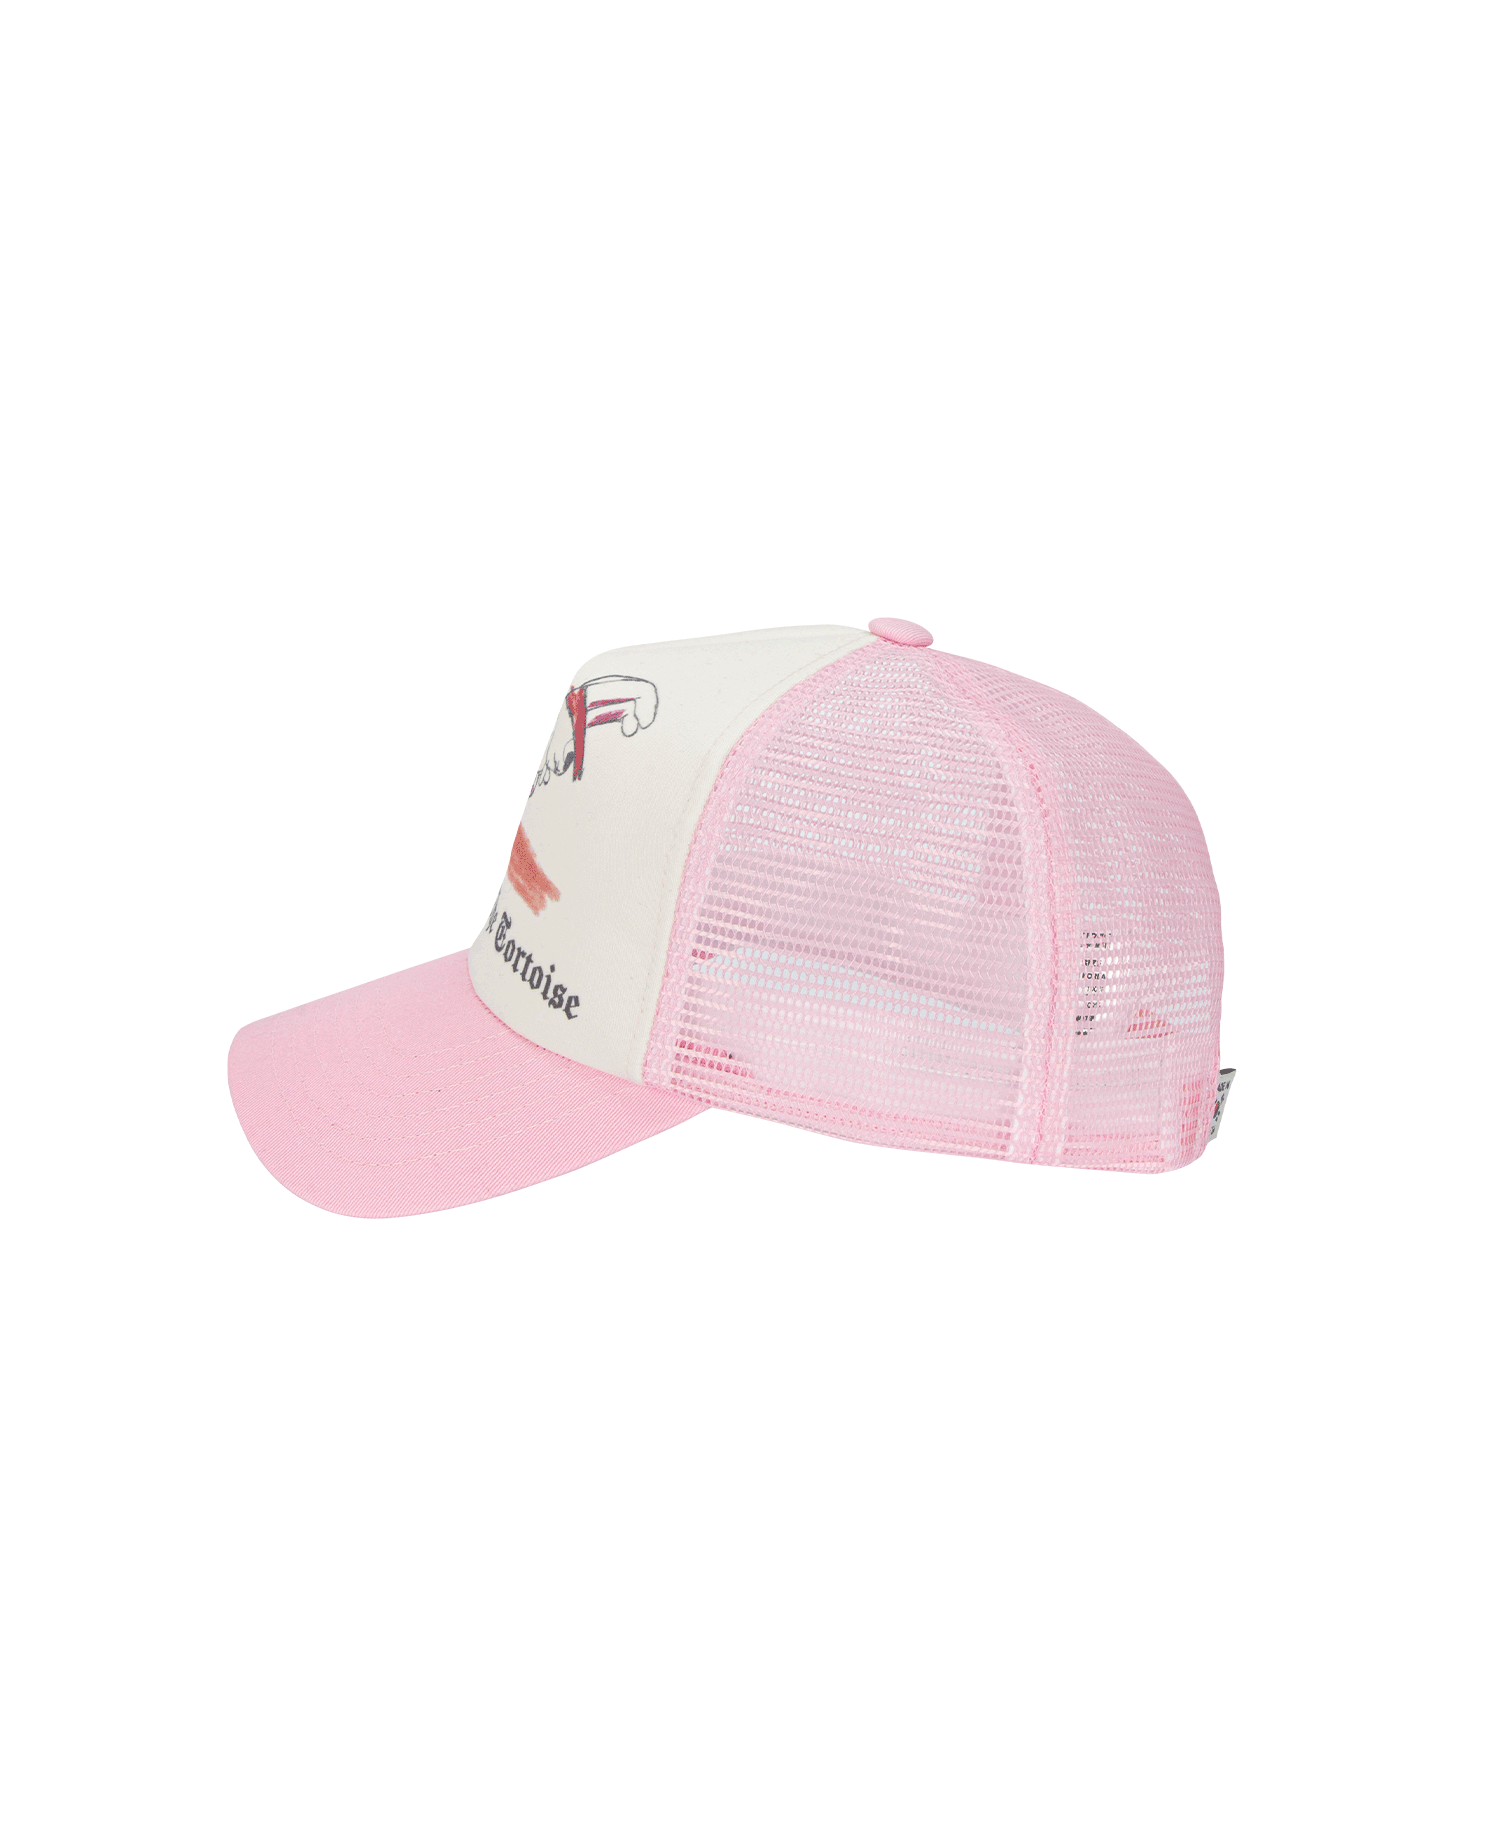 HARE AND TORTOISE TRUCKER CAP_PINK